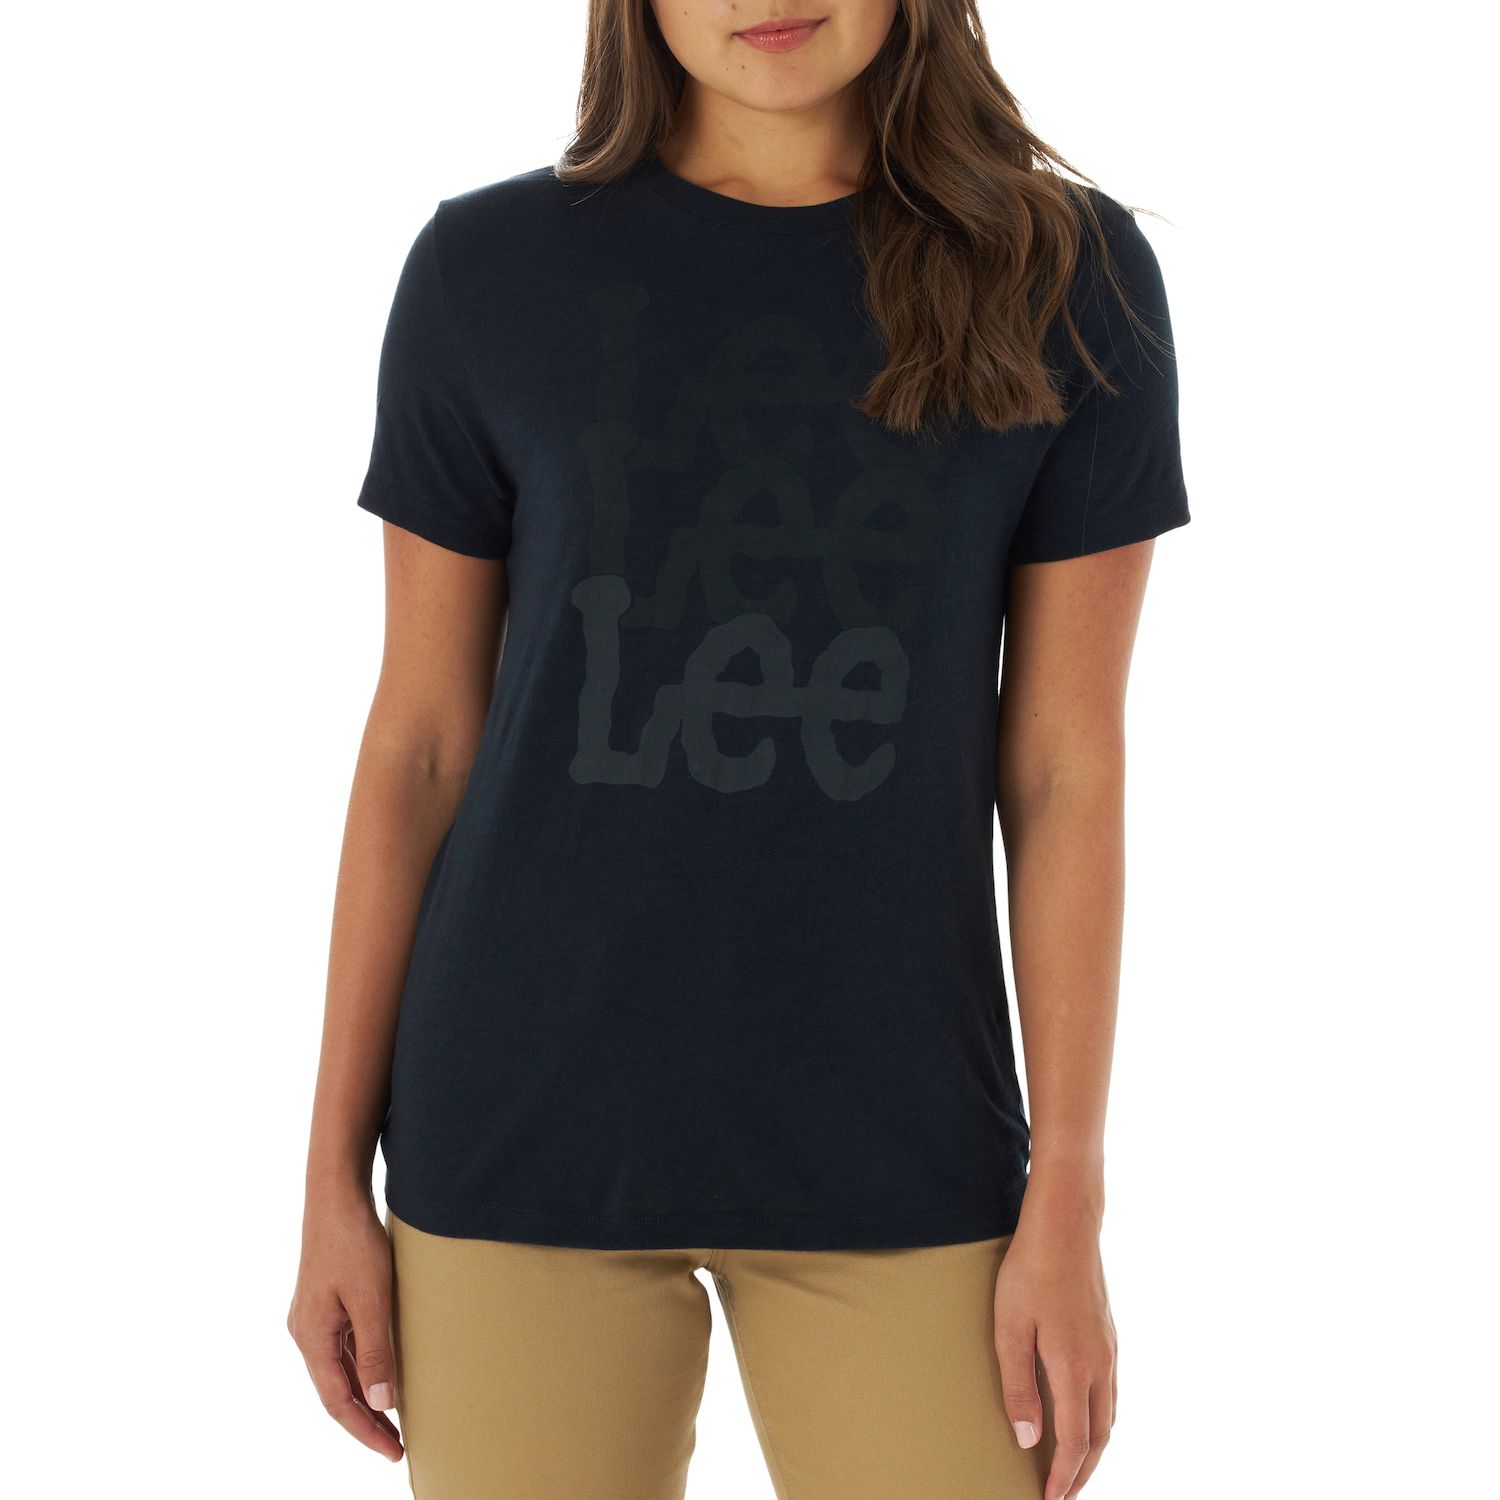 Image for Lee Women's Logo Graphic Tee at Kohl's.